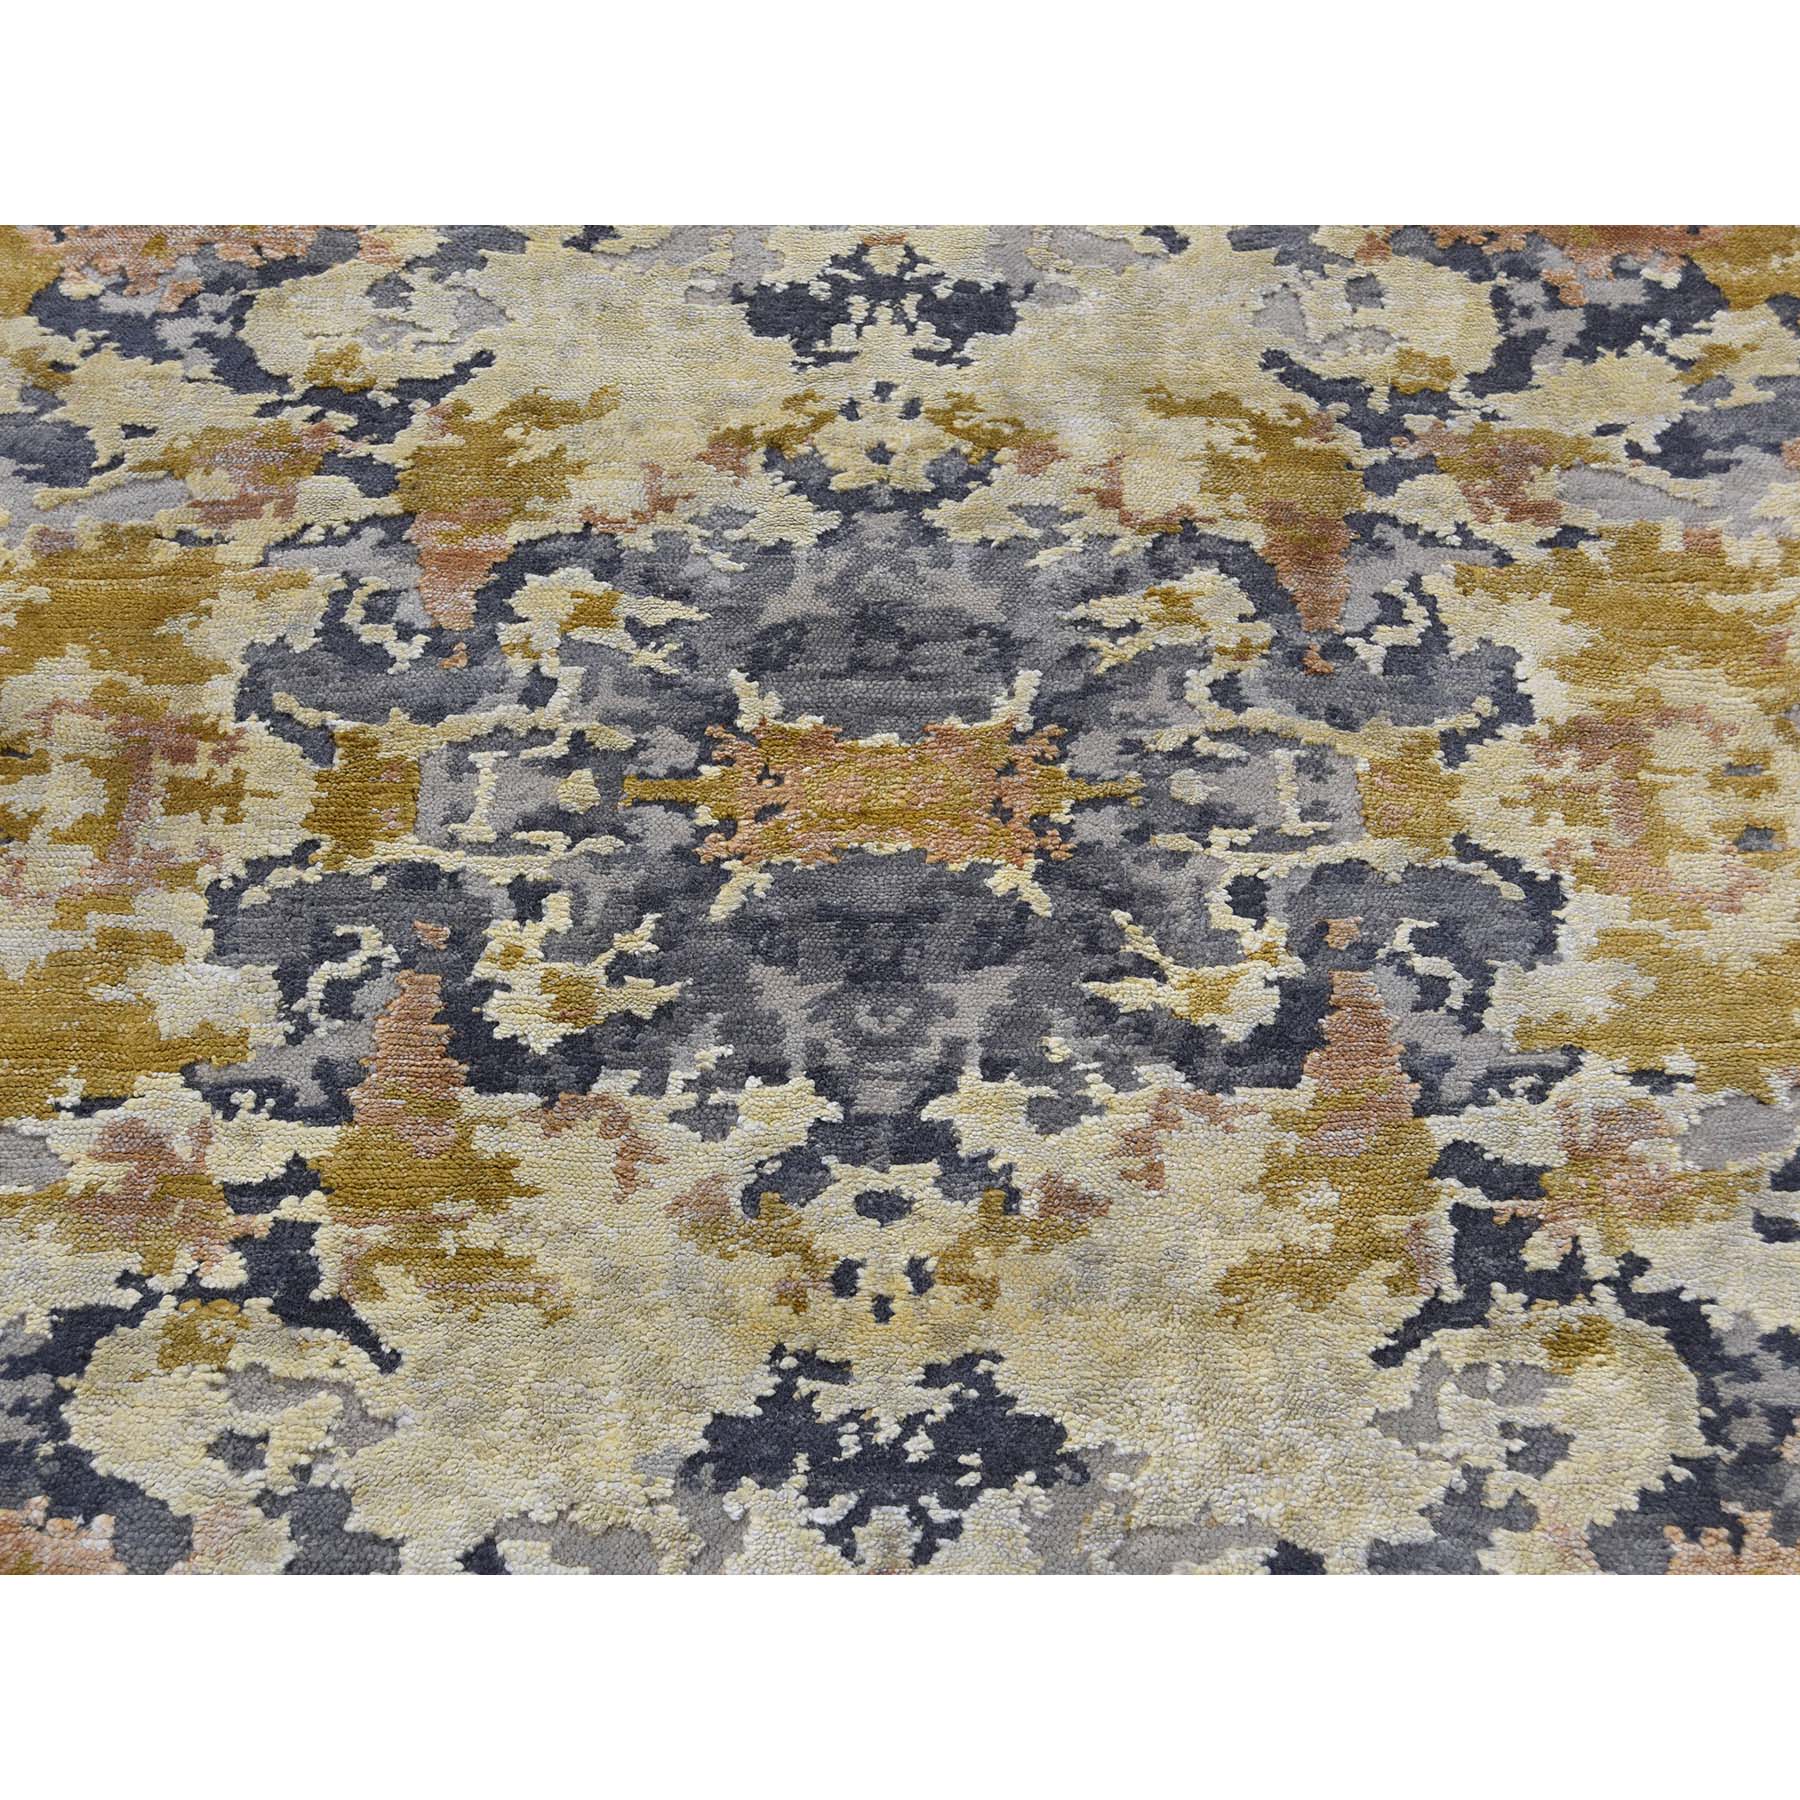 6-1 x8-10  Wool And Silk Abstract Design Hand-Knotted Oriental Rug 